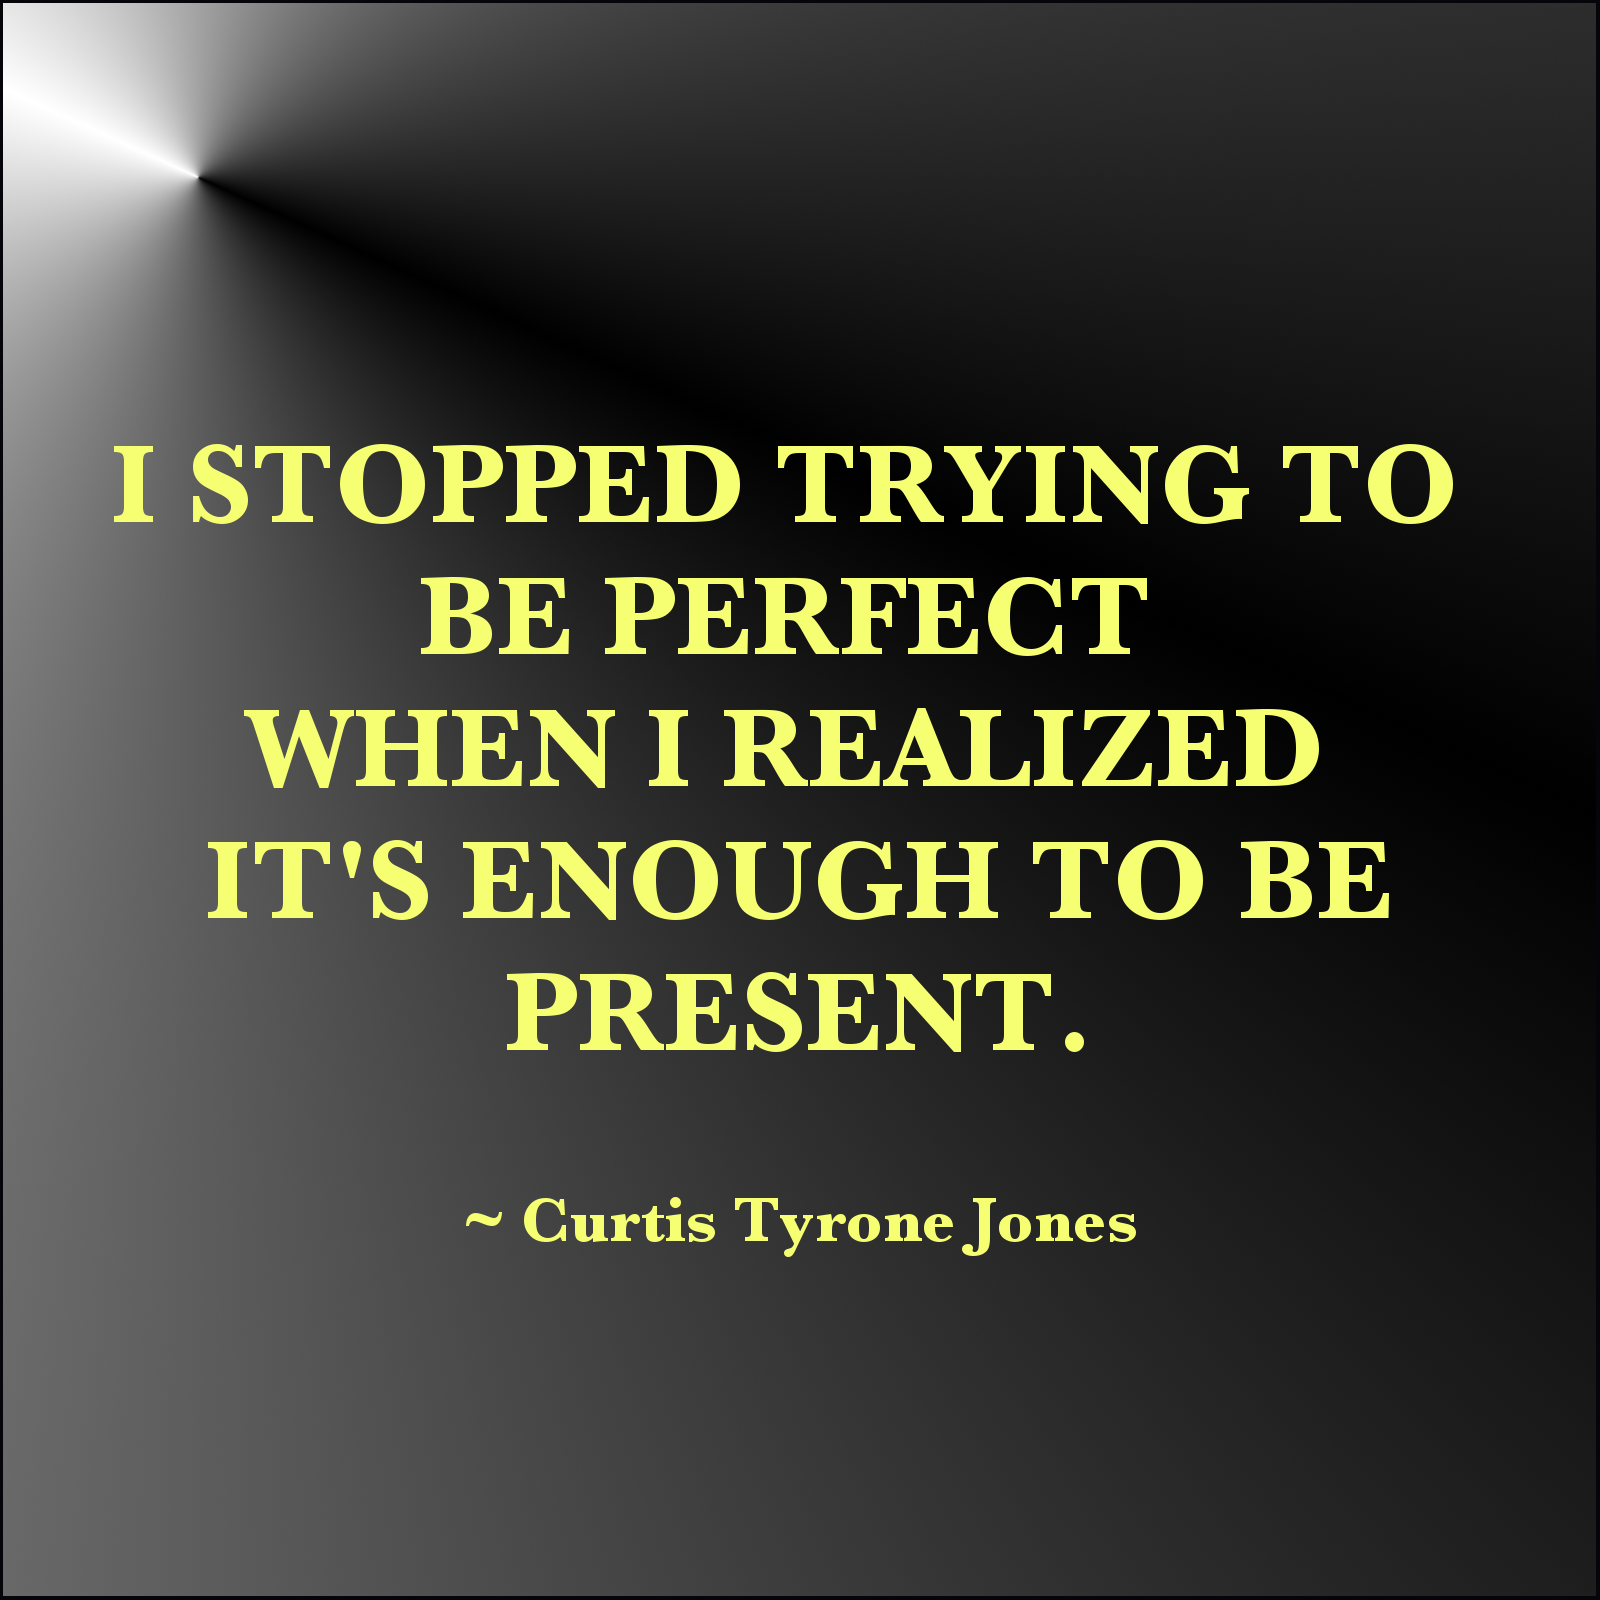 I stopped trying to be perfect when I realized it's enough to be present. Curtis Tyrone Jones